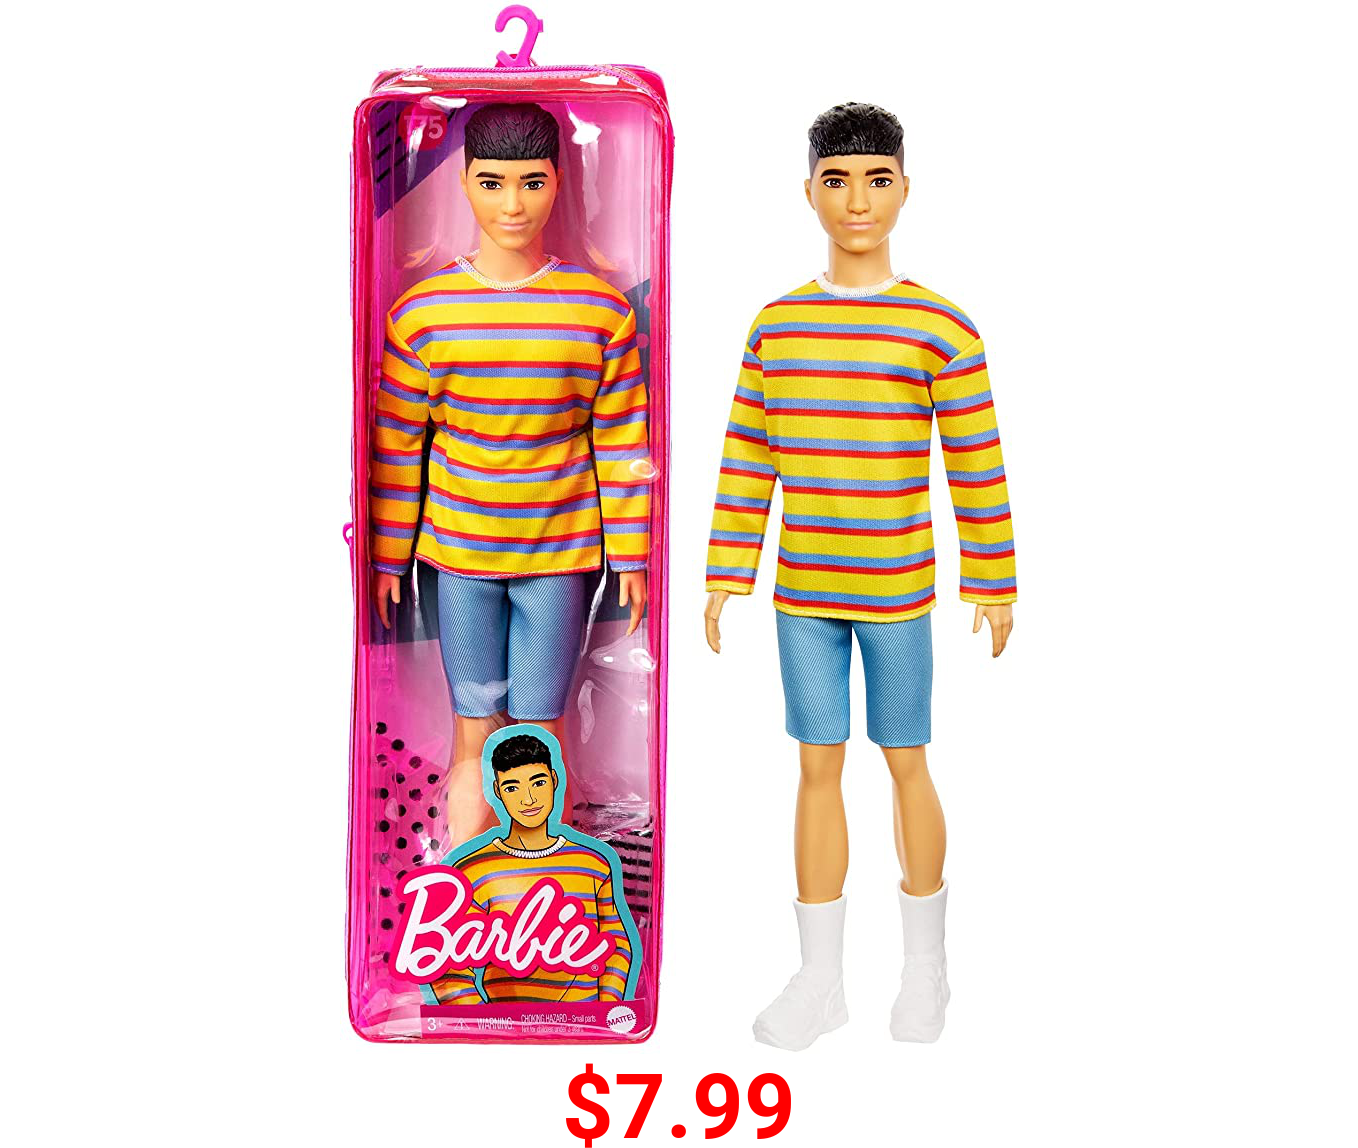 Barbie Ken Fashionistas Doll #175 with Sculpted Brunette Hair Wearing a Long-Sleeve Colorful Striped Shirt, Denim Shorts, White Boots, Toy for Kids 3 to 8 Years Old